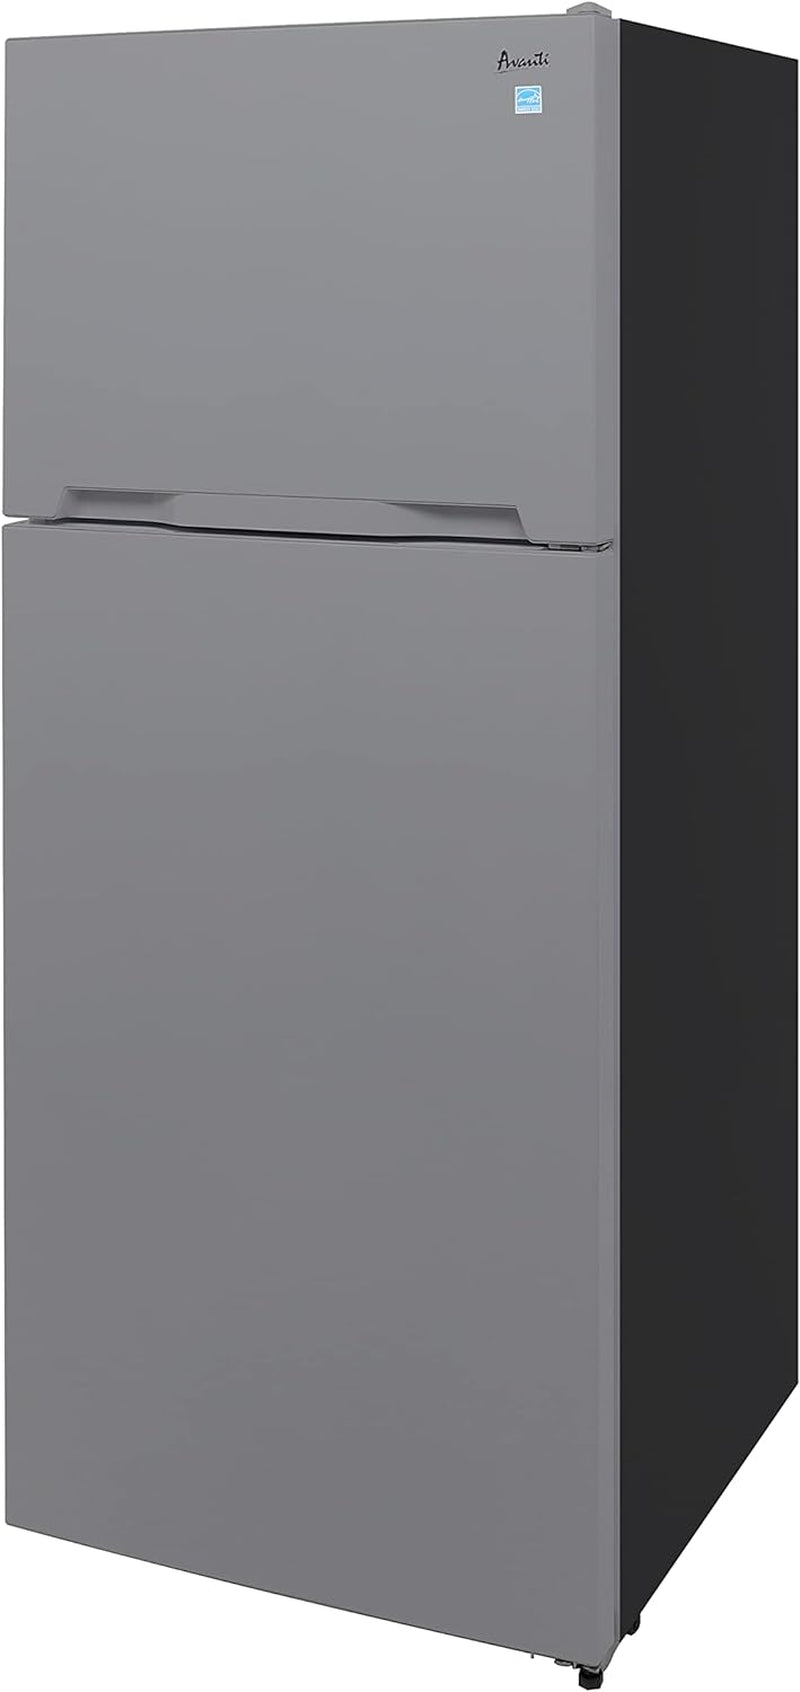 Offer For FF14V3S FF14V Frost-Free Apartment Size Refrigerator, 14.3 Cu. Ft. Capacity, in Stainless Steel MowerShop